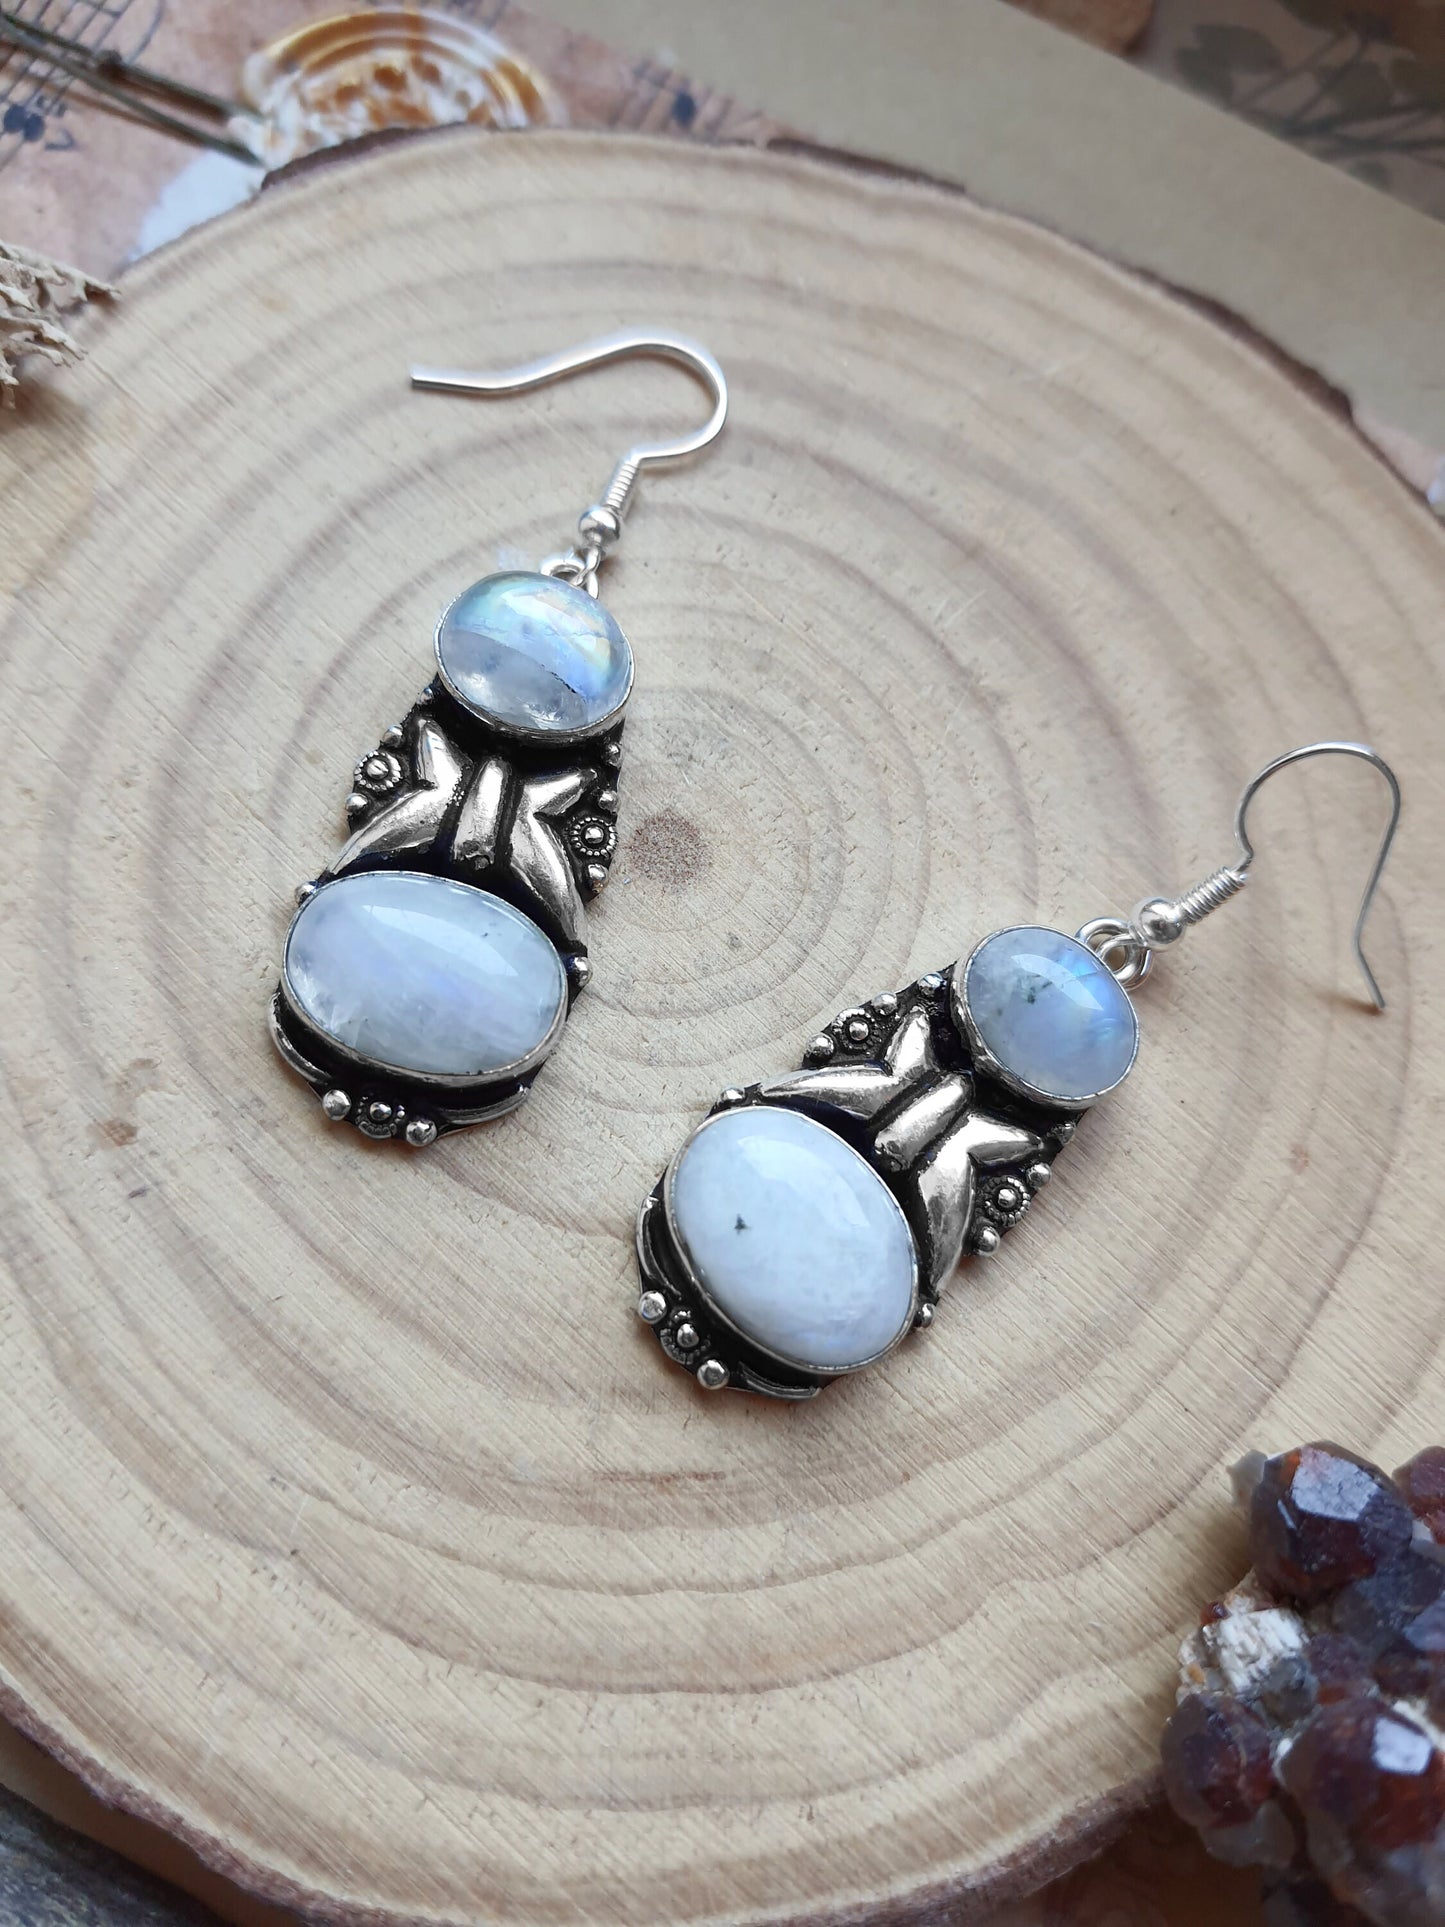 White Moonstone Earrings Sterling Silver Big Dangle Earrings Statement Earrings Boho Gemstone Earrings Unique Jewellery